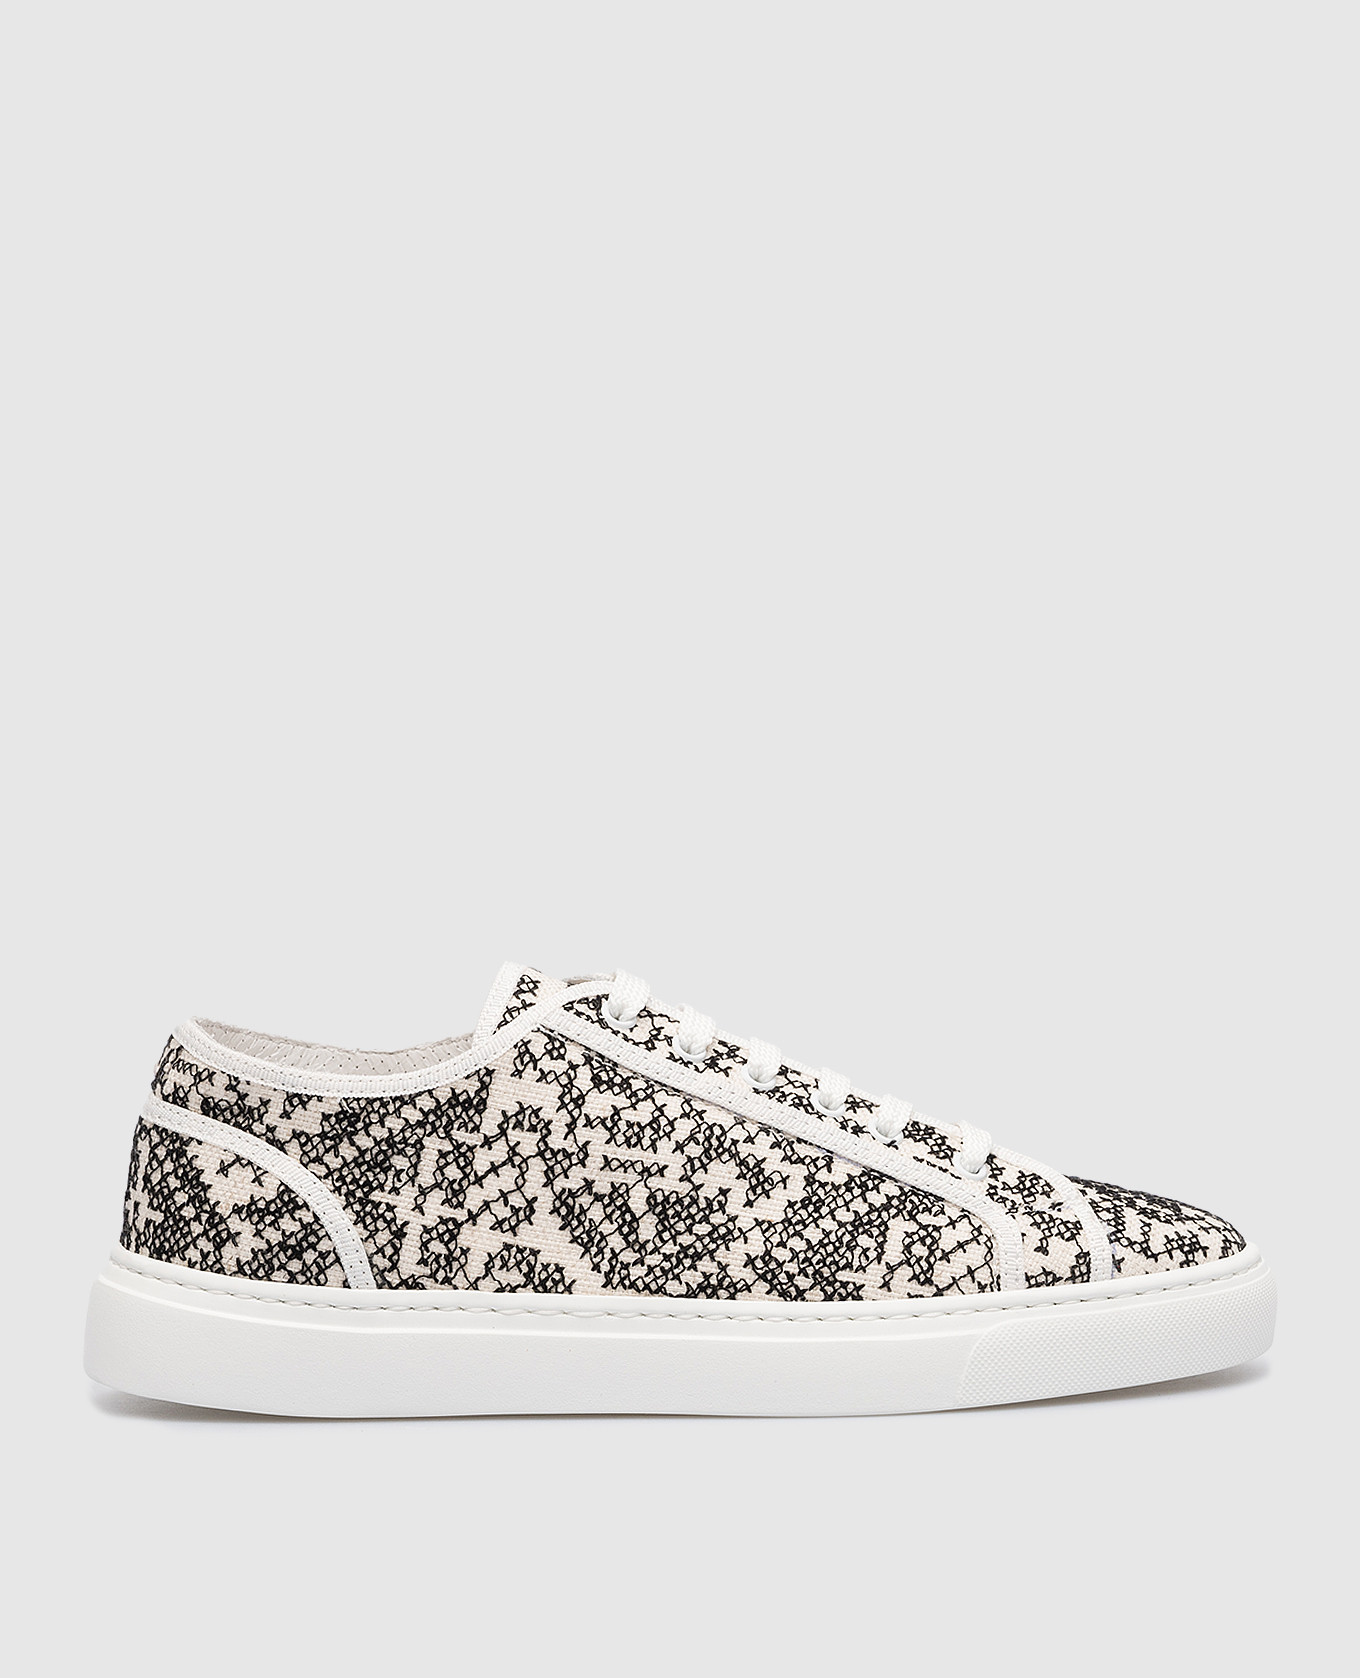 Beige sneakers with a pattern